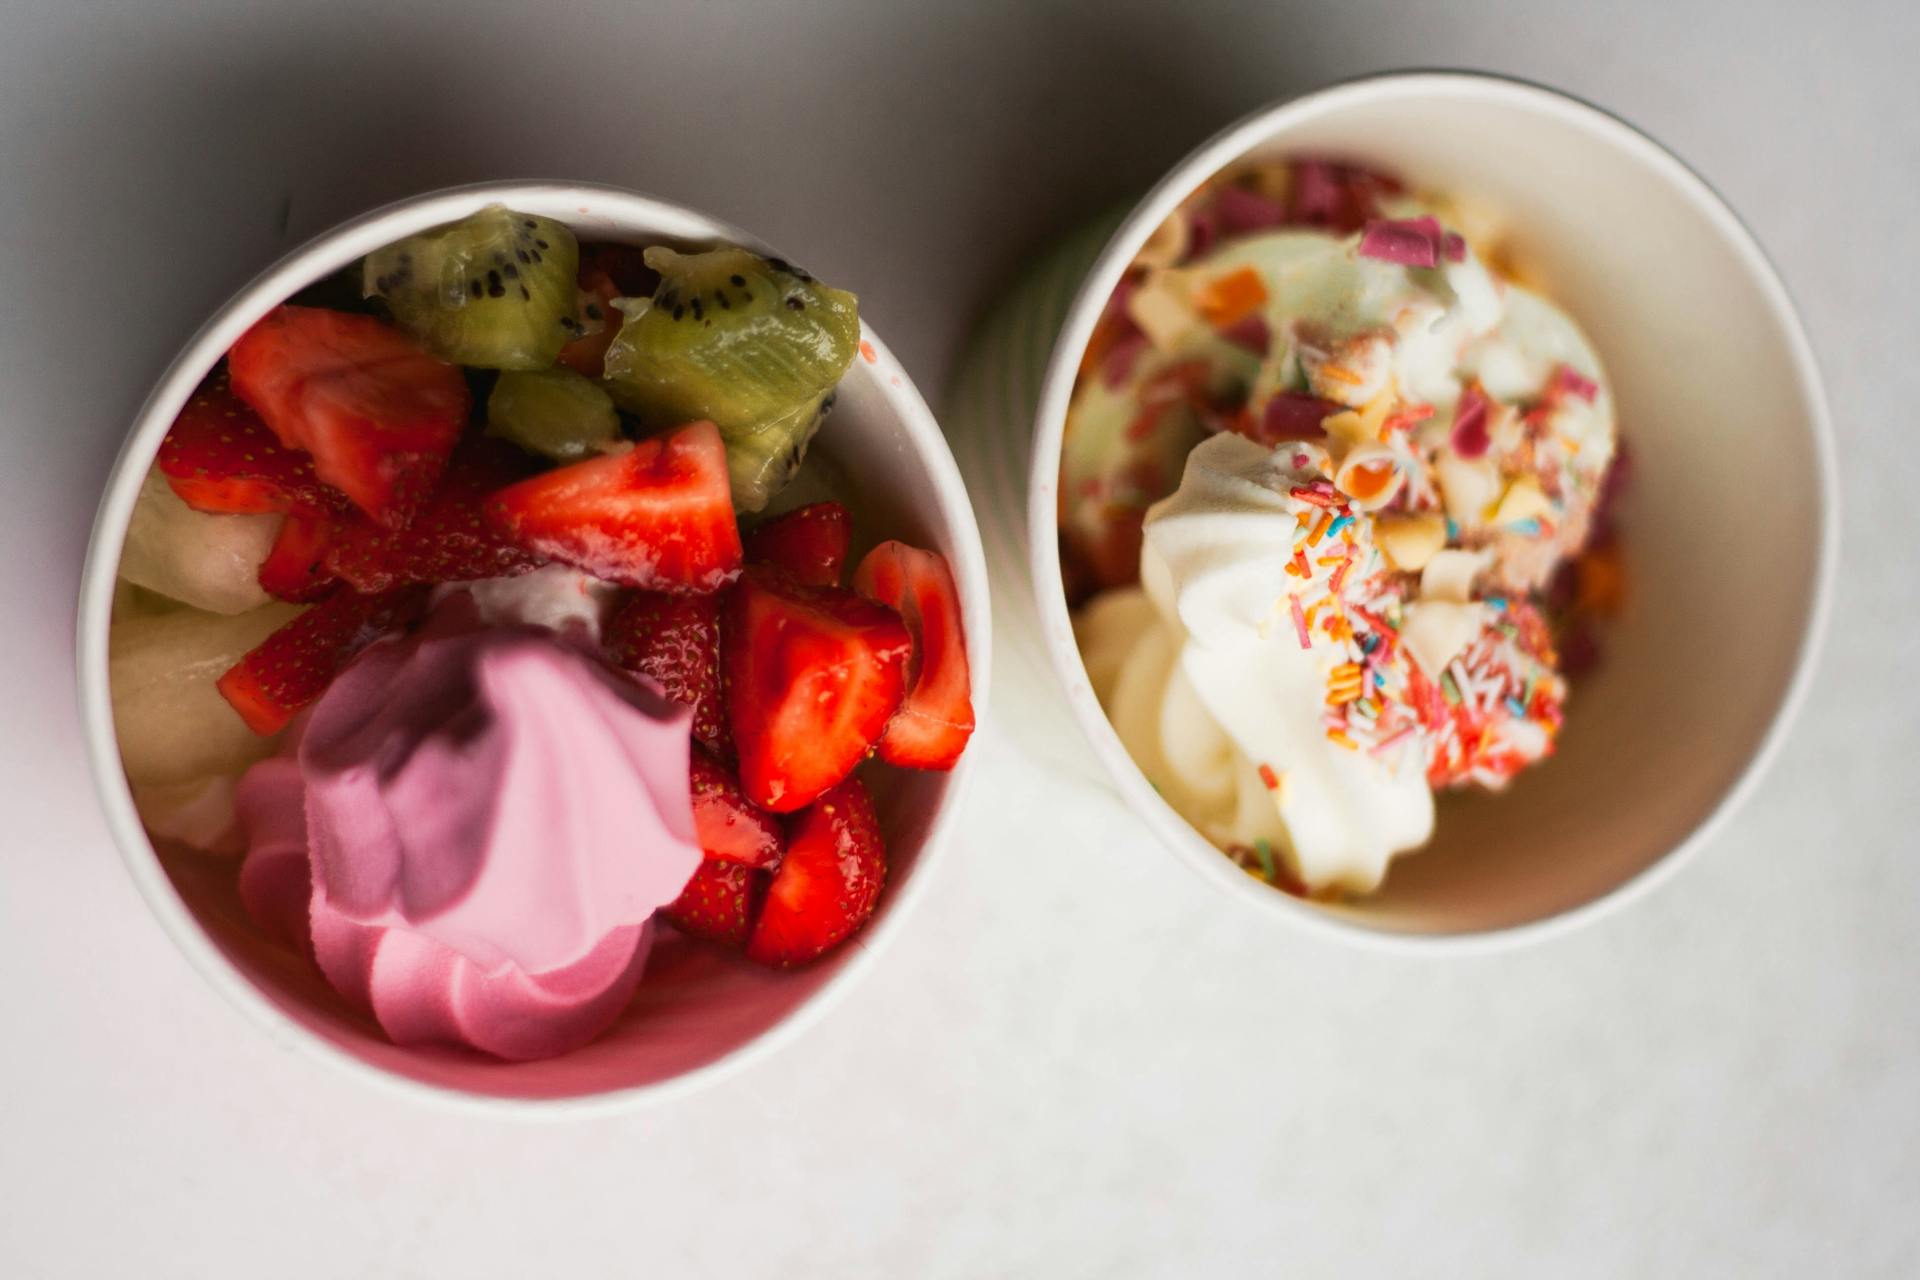 Two bowls of ice cream | Source: Pexels